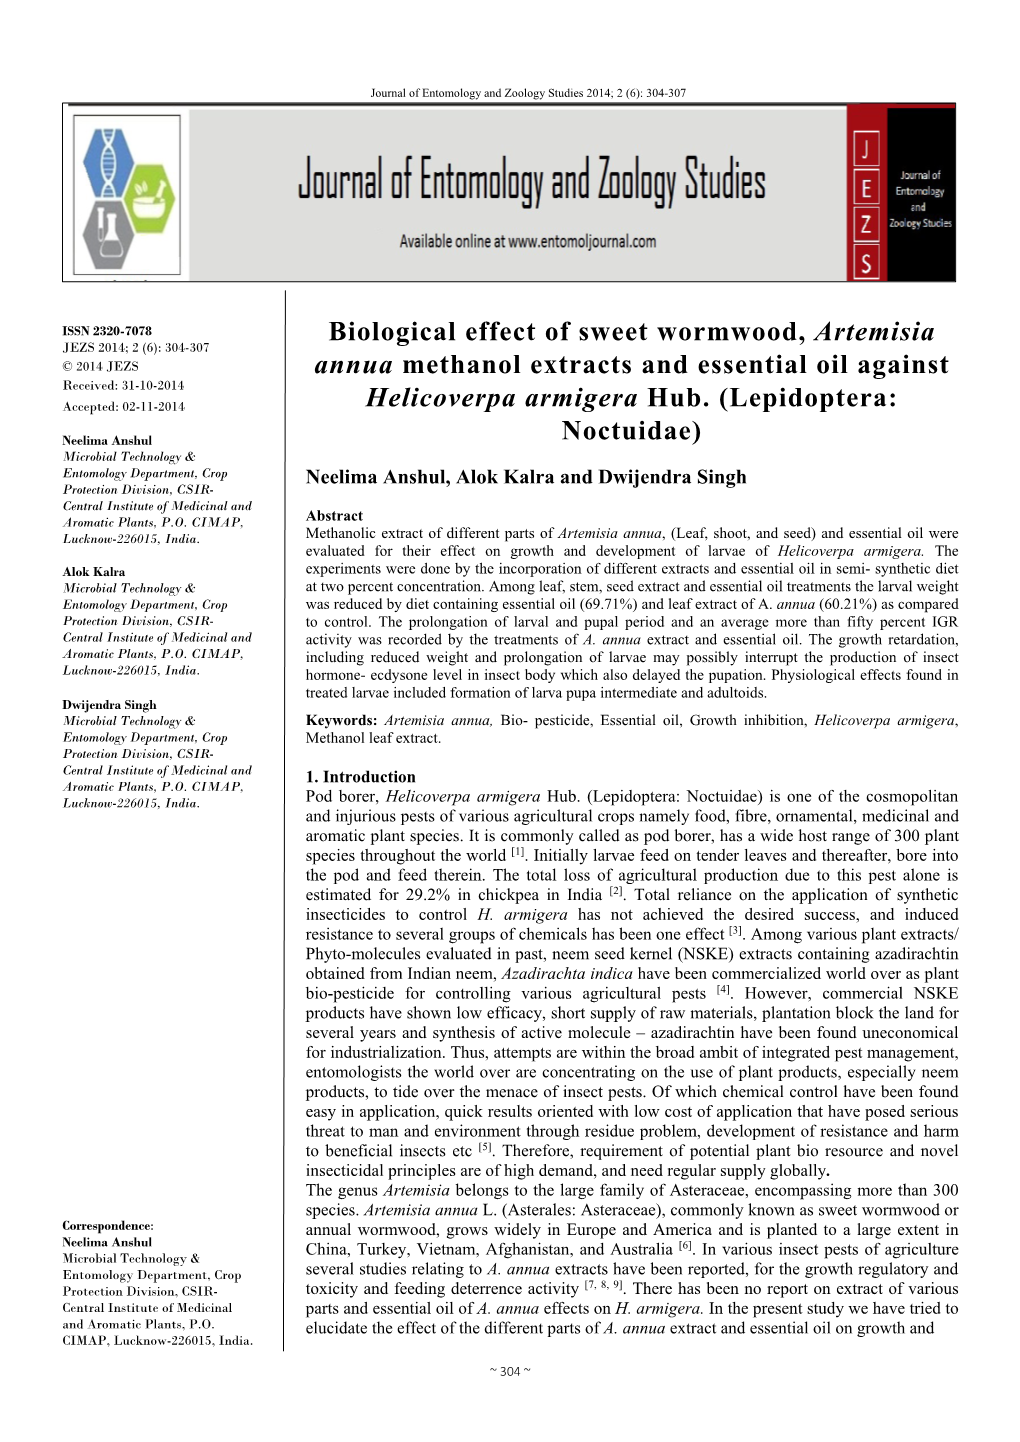 Biological Effect of Sweet Wormwood, Artemisia Annua Methanol Extracts and Essential Oil Against Helicoverpa Armigera Hub